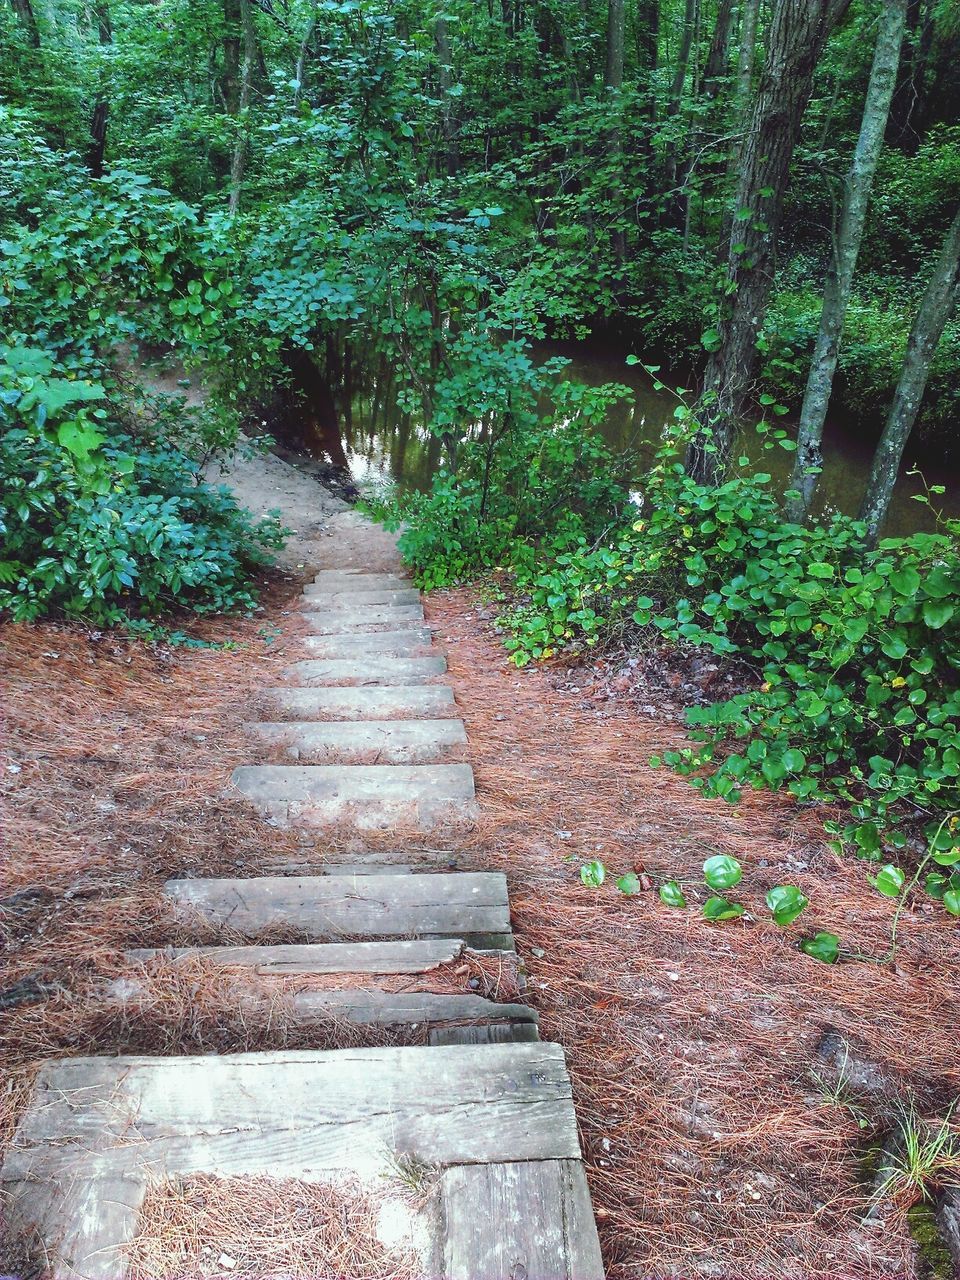 Stairs along trees in the forest